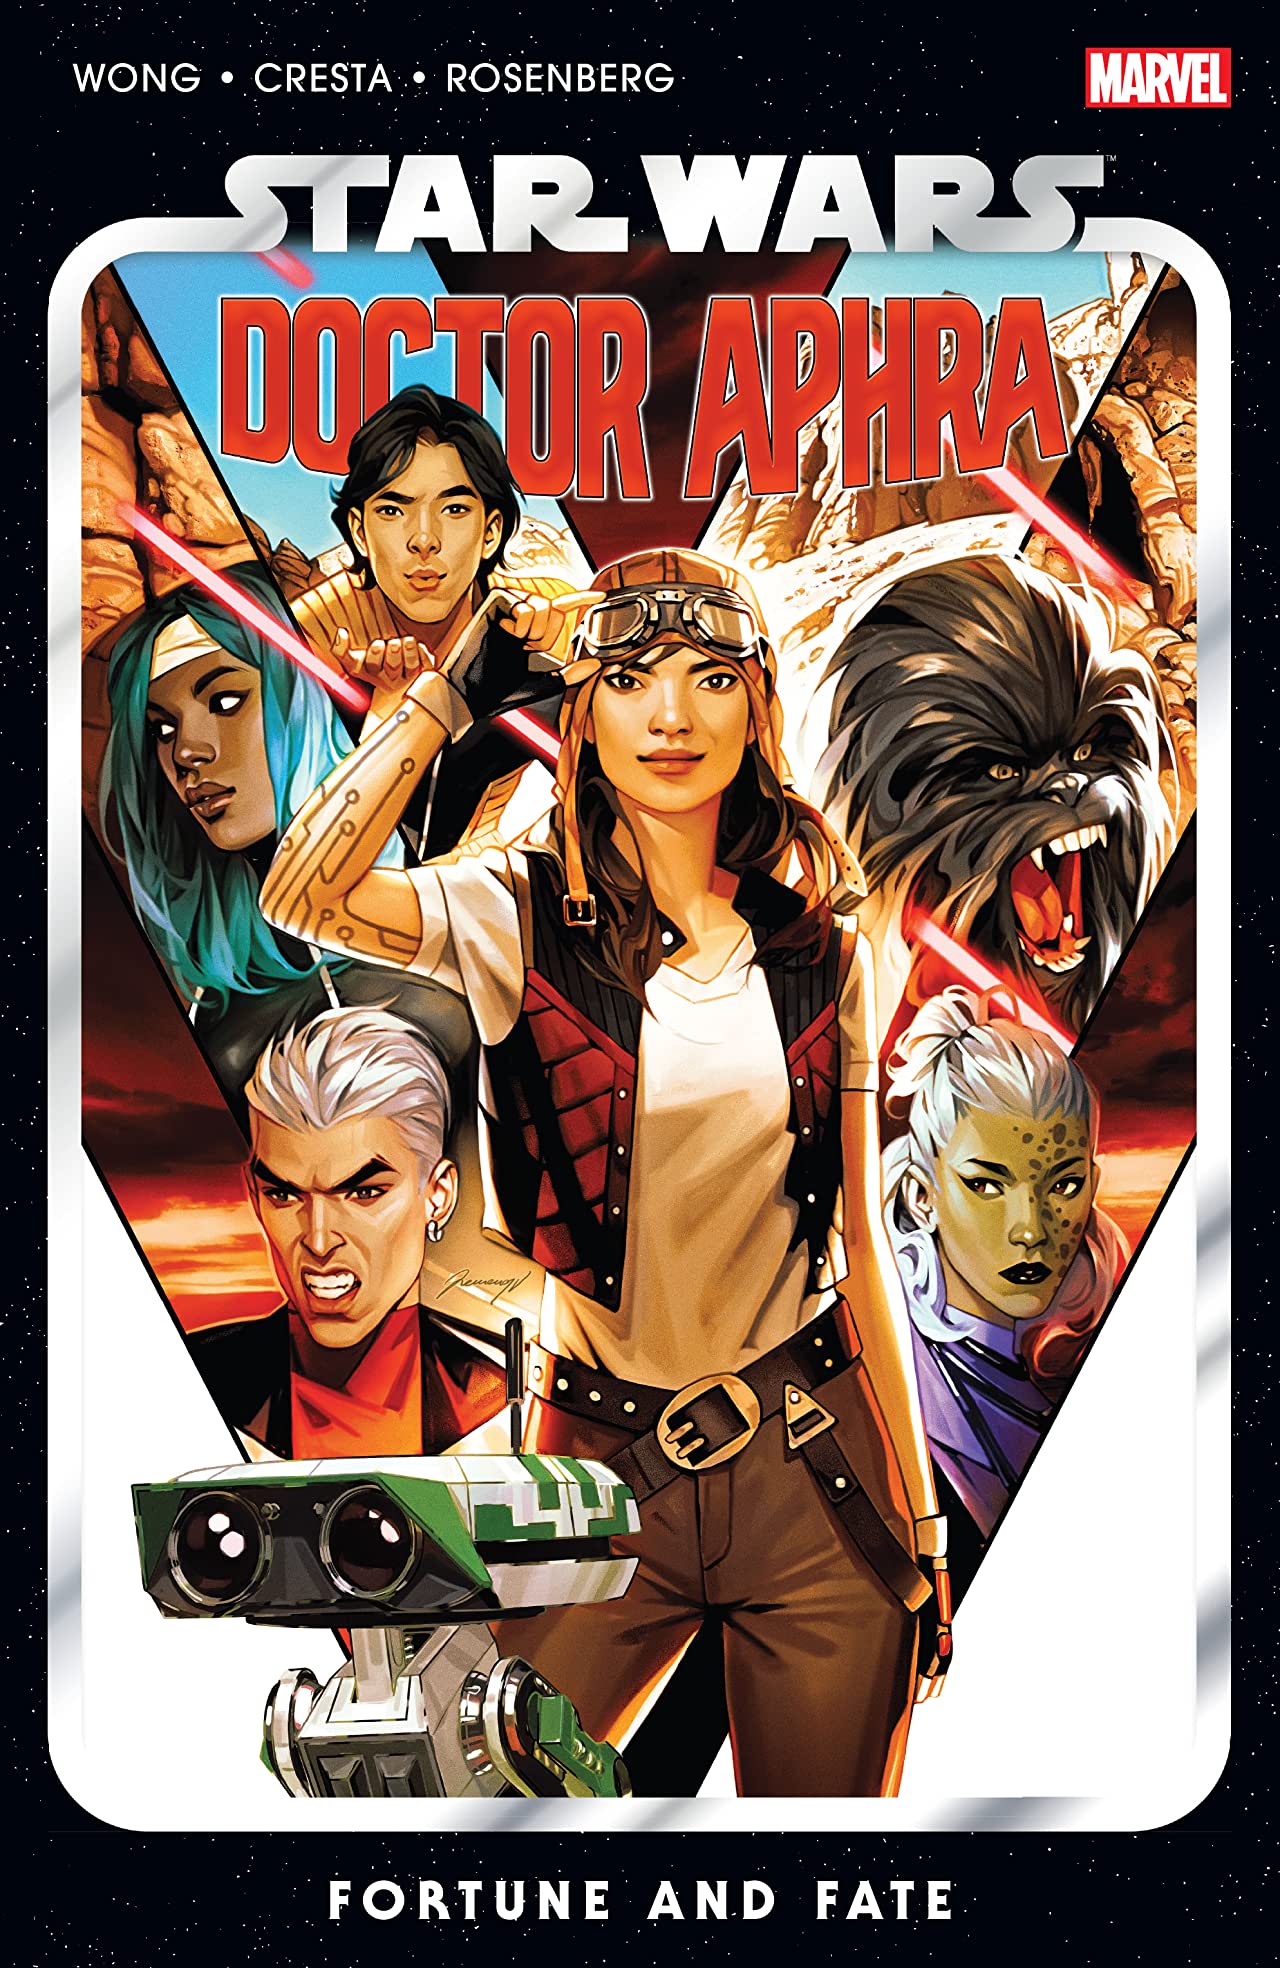 Star Wars: Doctor Aphra Vol. 1: Fortune And Fate (Trade Paperback)